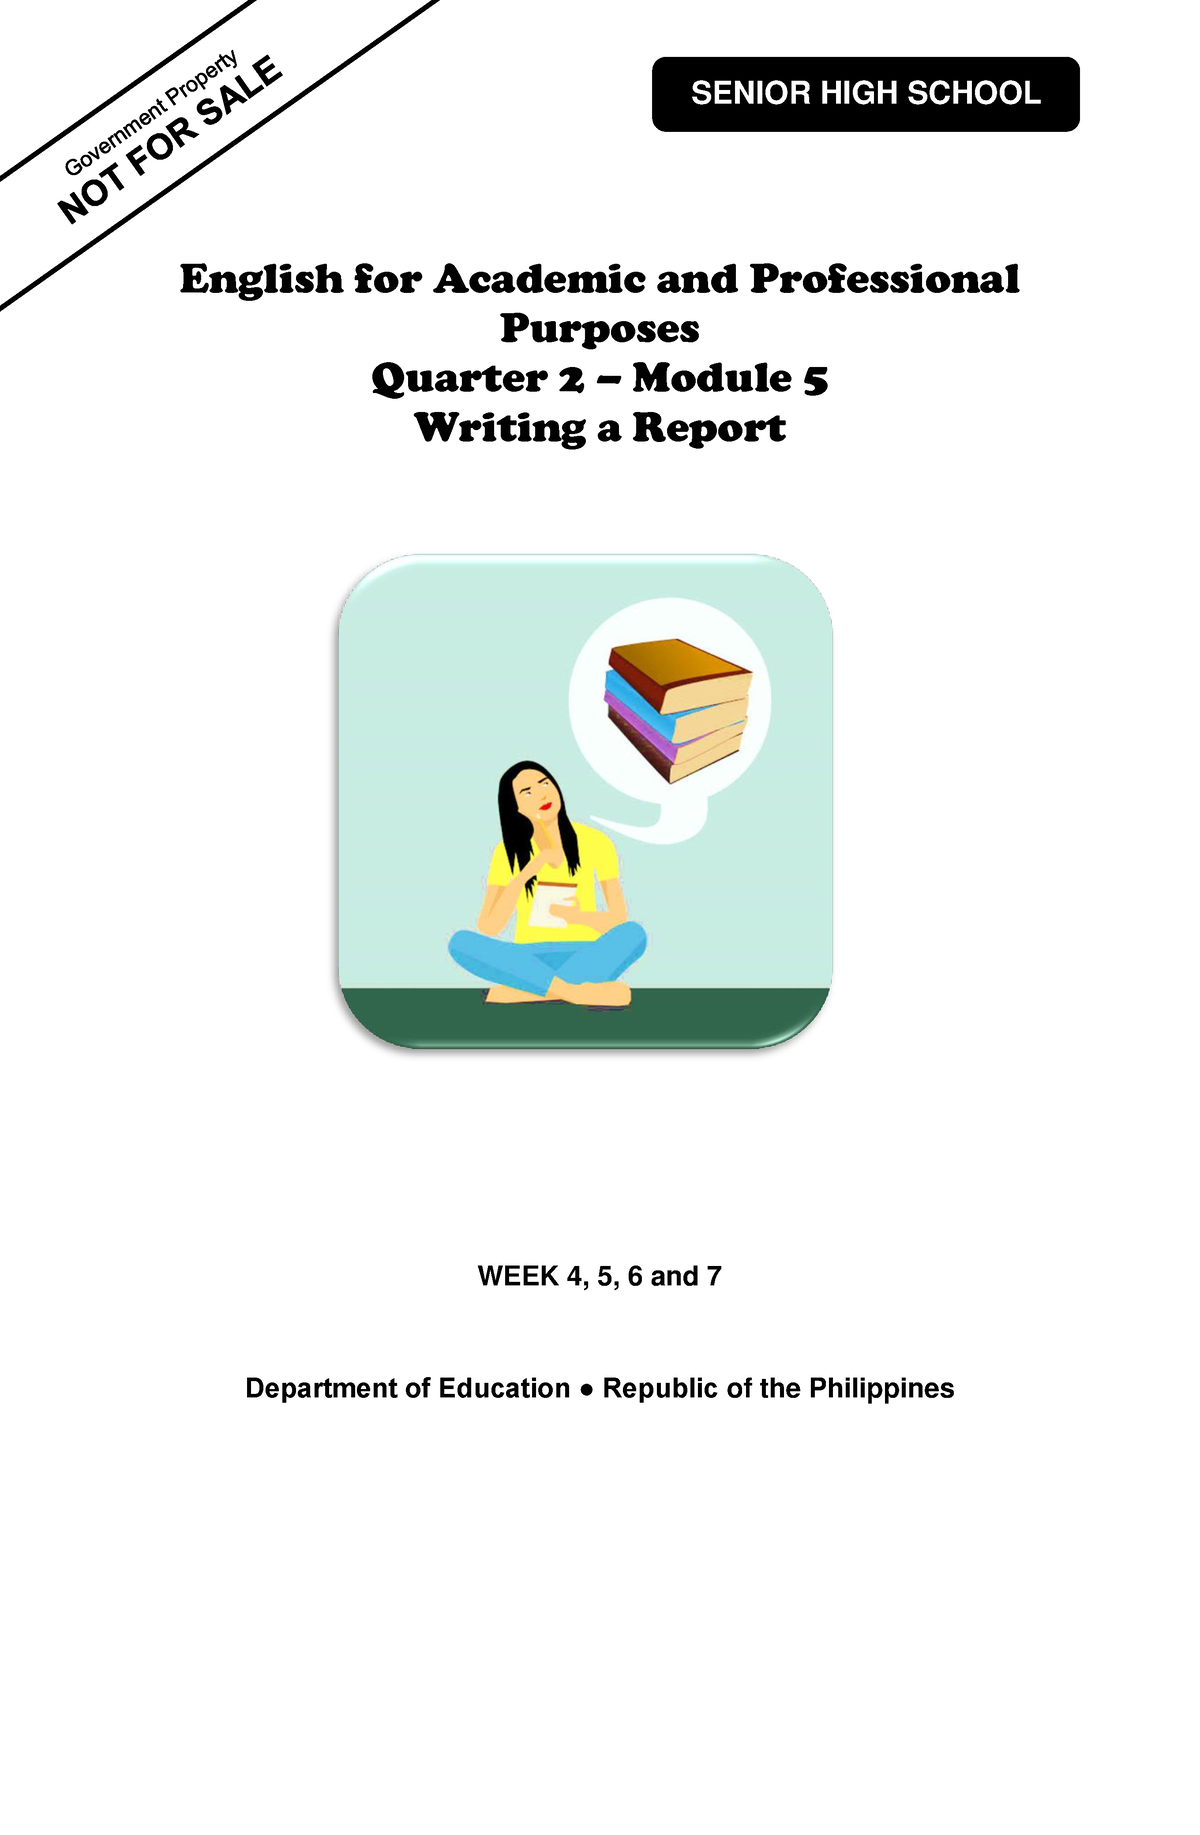 Eapp Q2 W4 7 English For Academic And Professional Purposes Quarter 2 Module 5 Writing A 1204